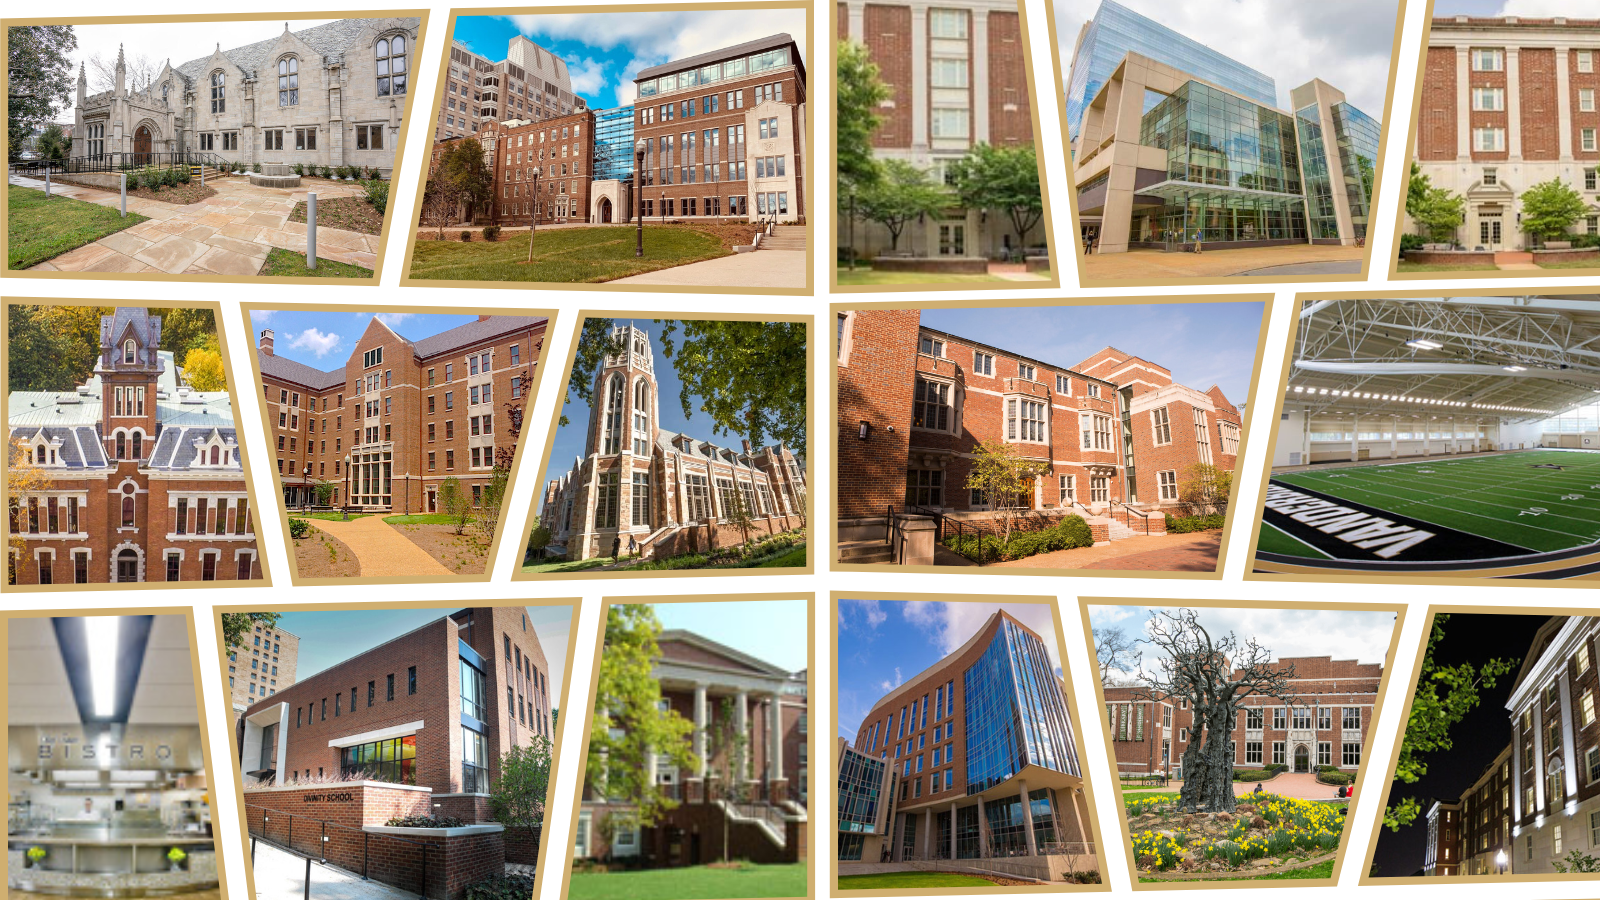 Twenty-five and counting: Vanderbilt University continues to expand its green building certifications